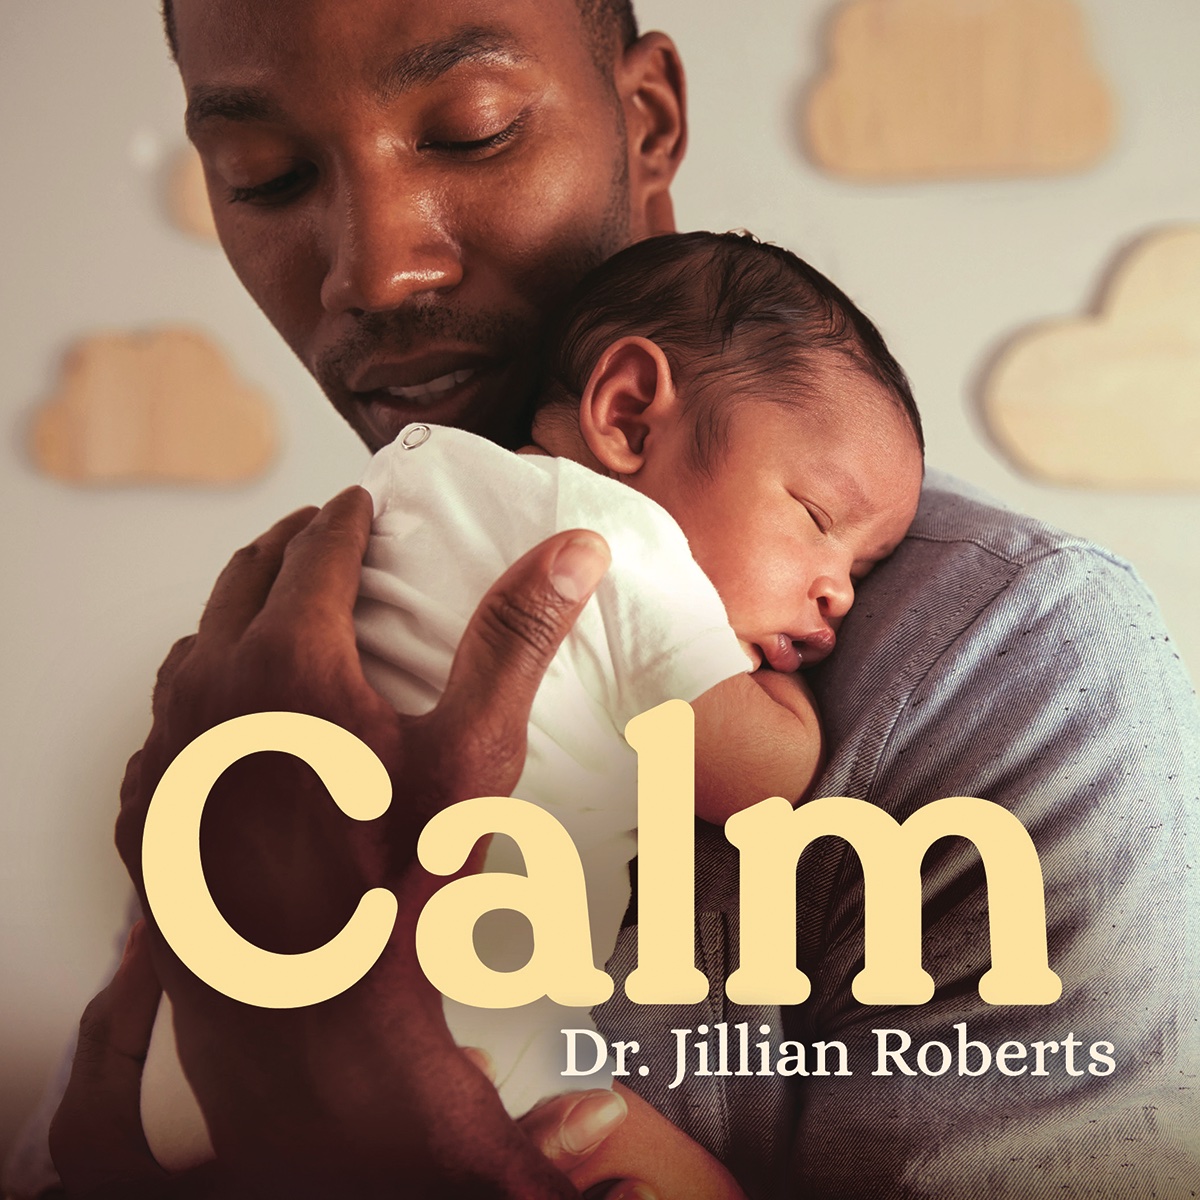 Celebrated child psychologist’s new baby book shows parents how to set an emotional example for children